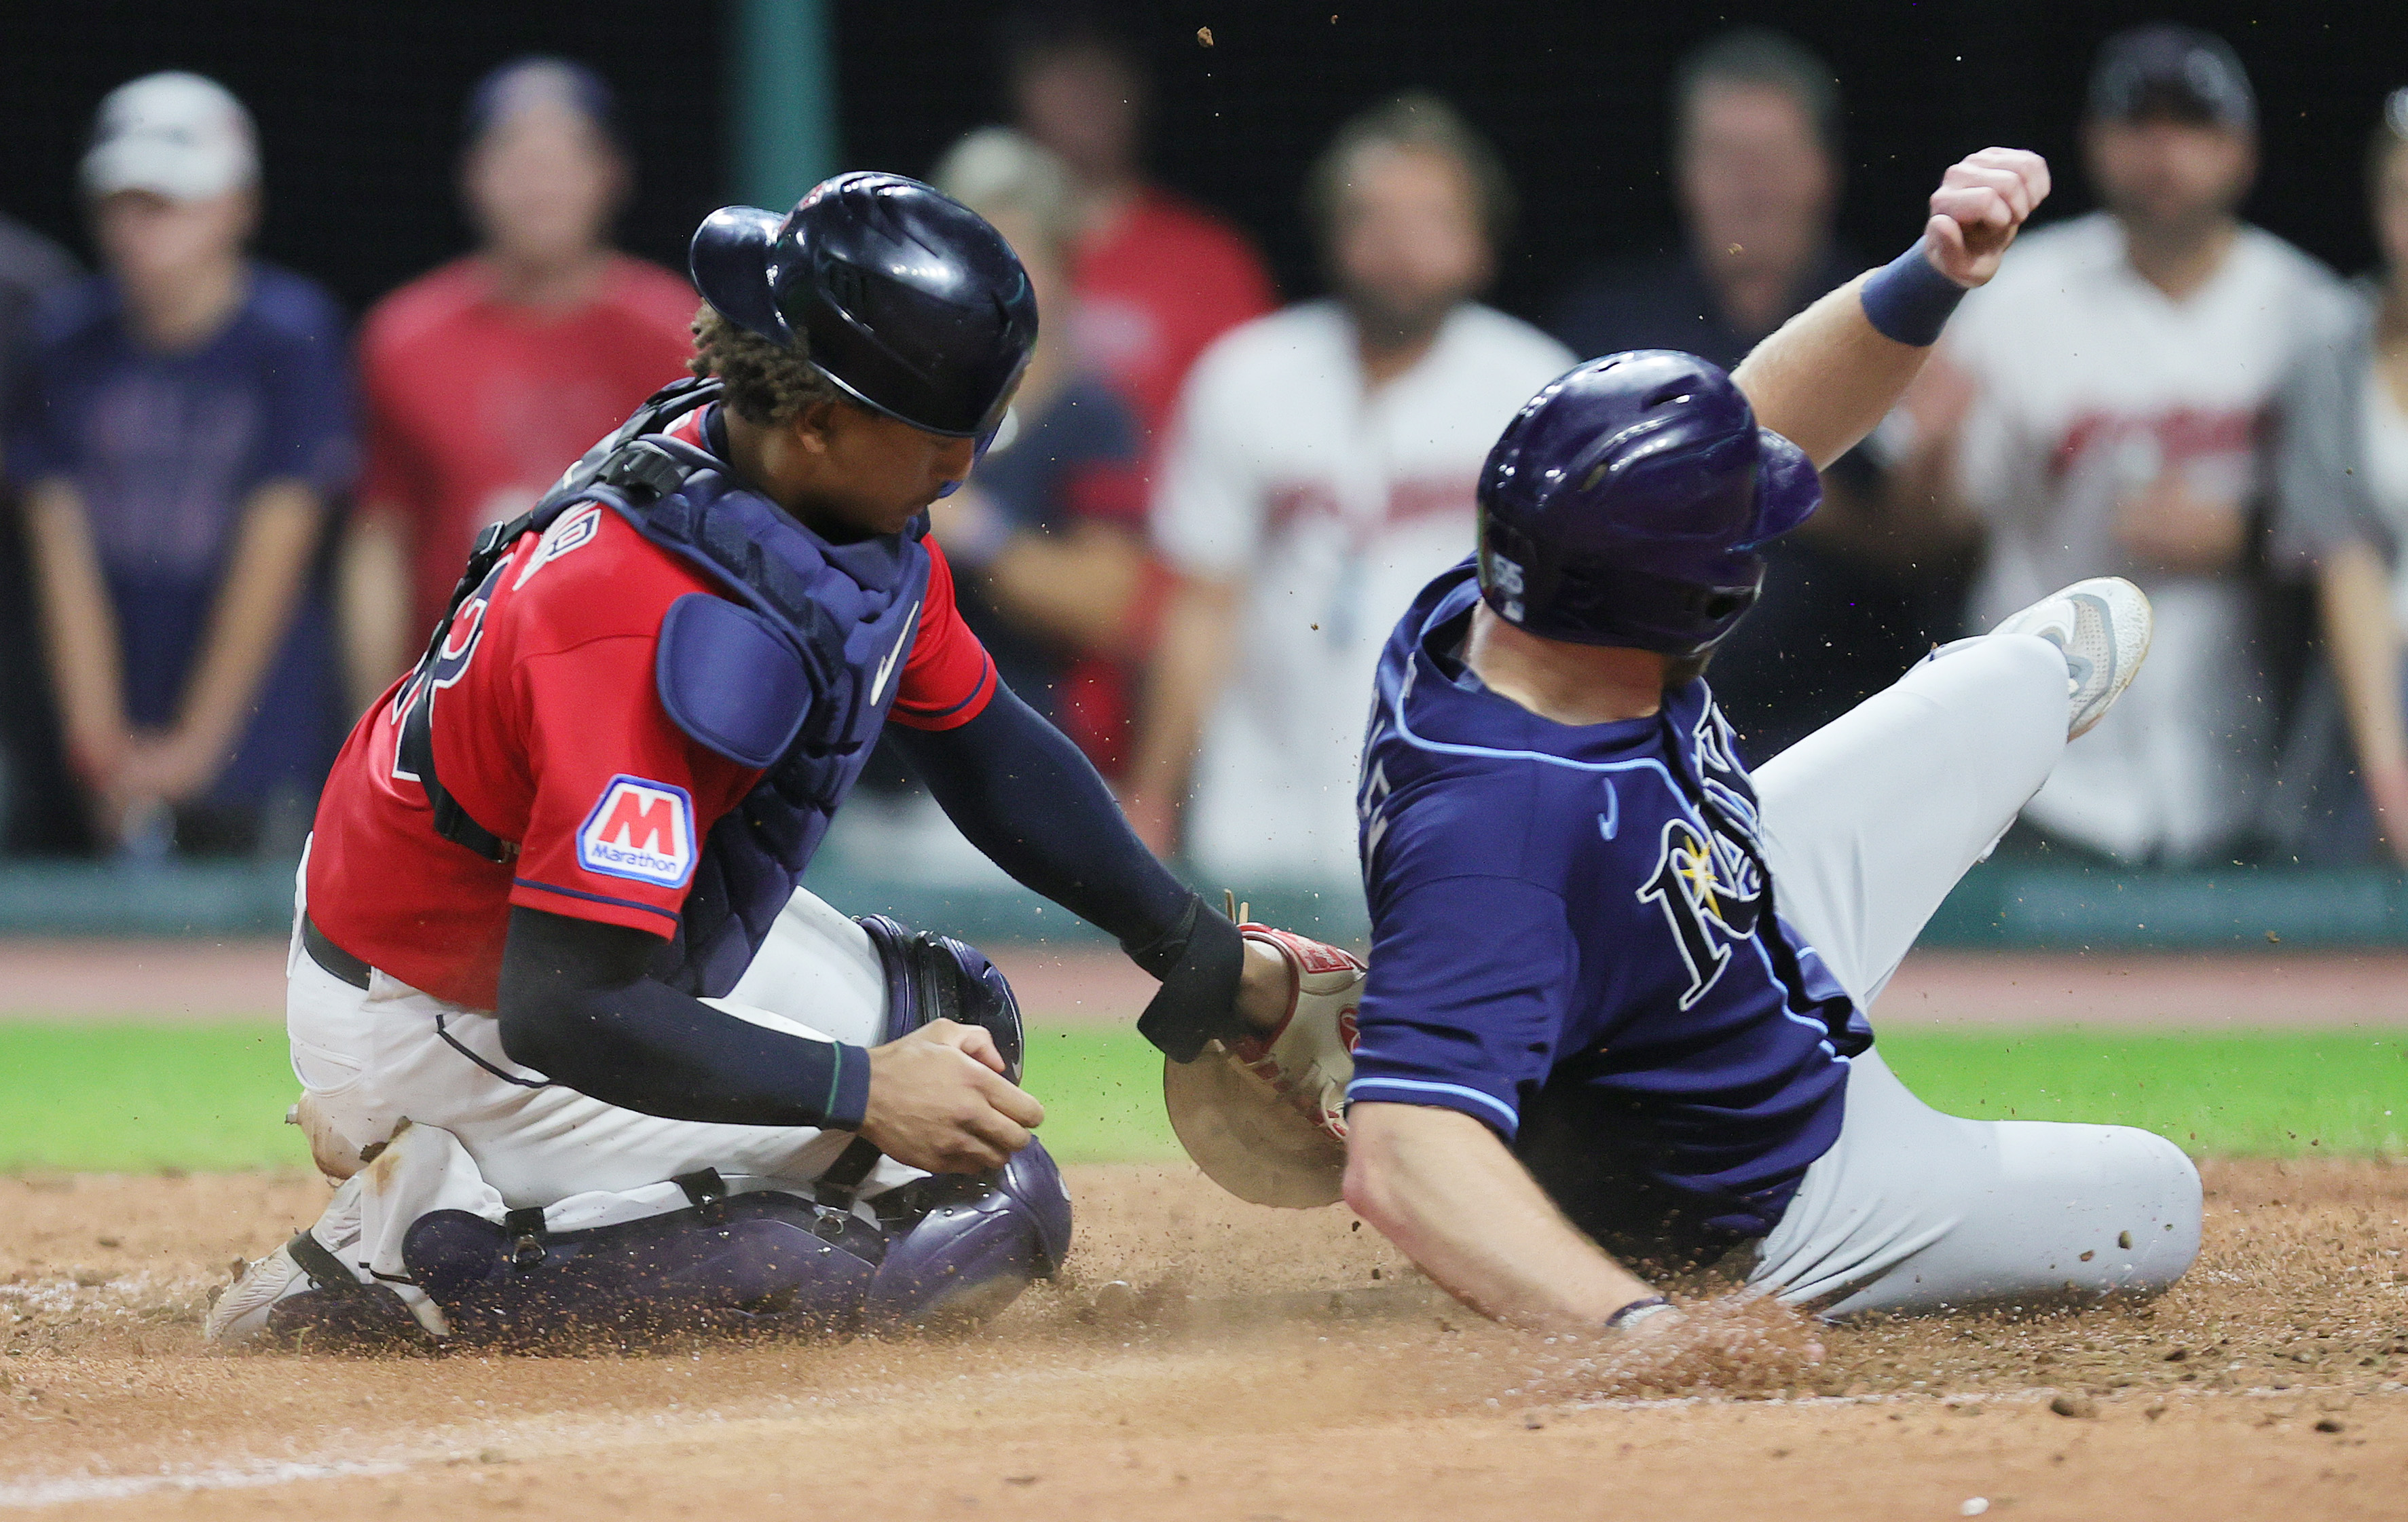 Cleveland Guardians catcher Bo Naylor tags out Tampa Bay Rays first baseman Luke Raley at home plate